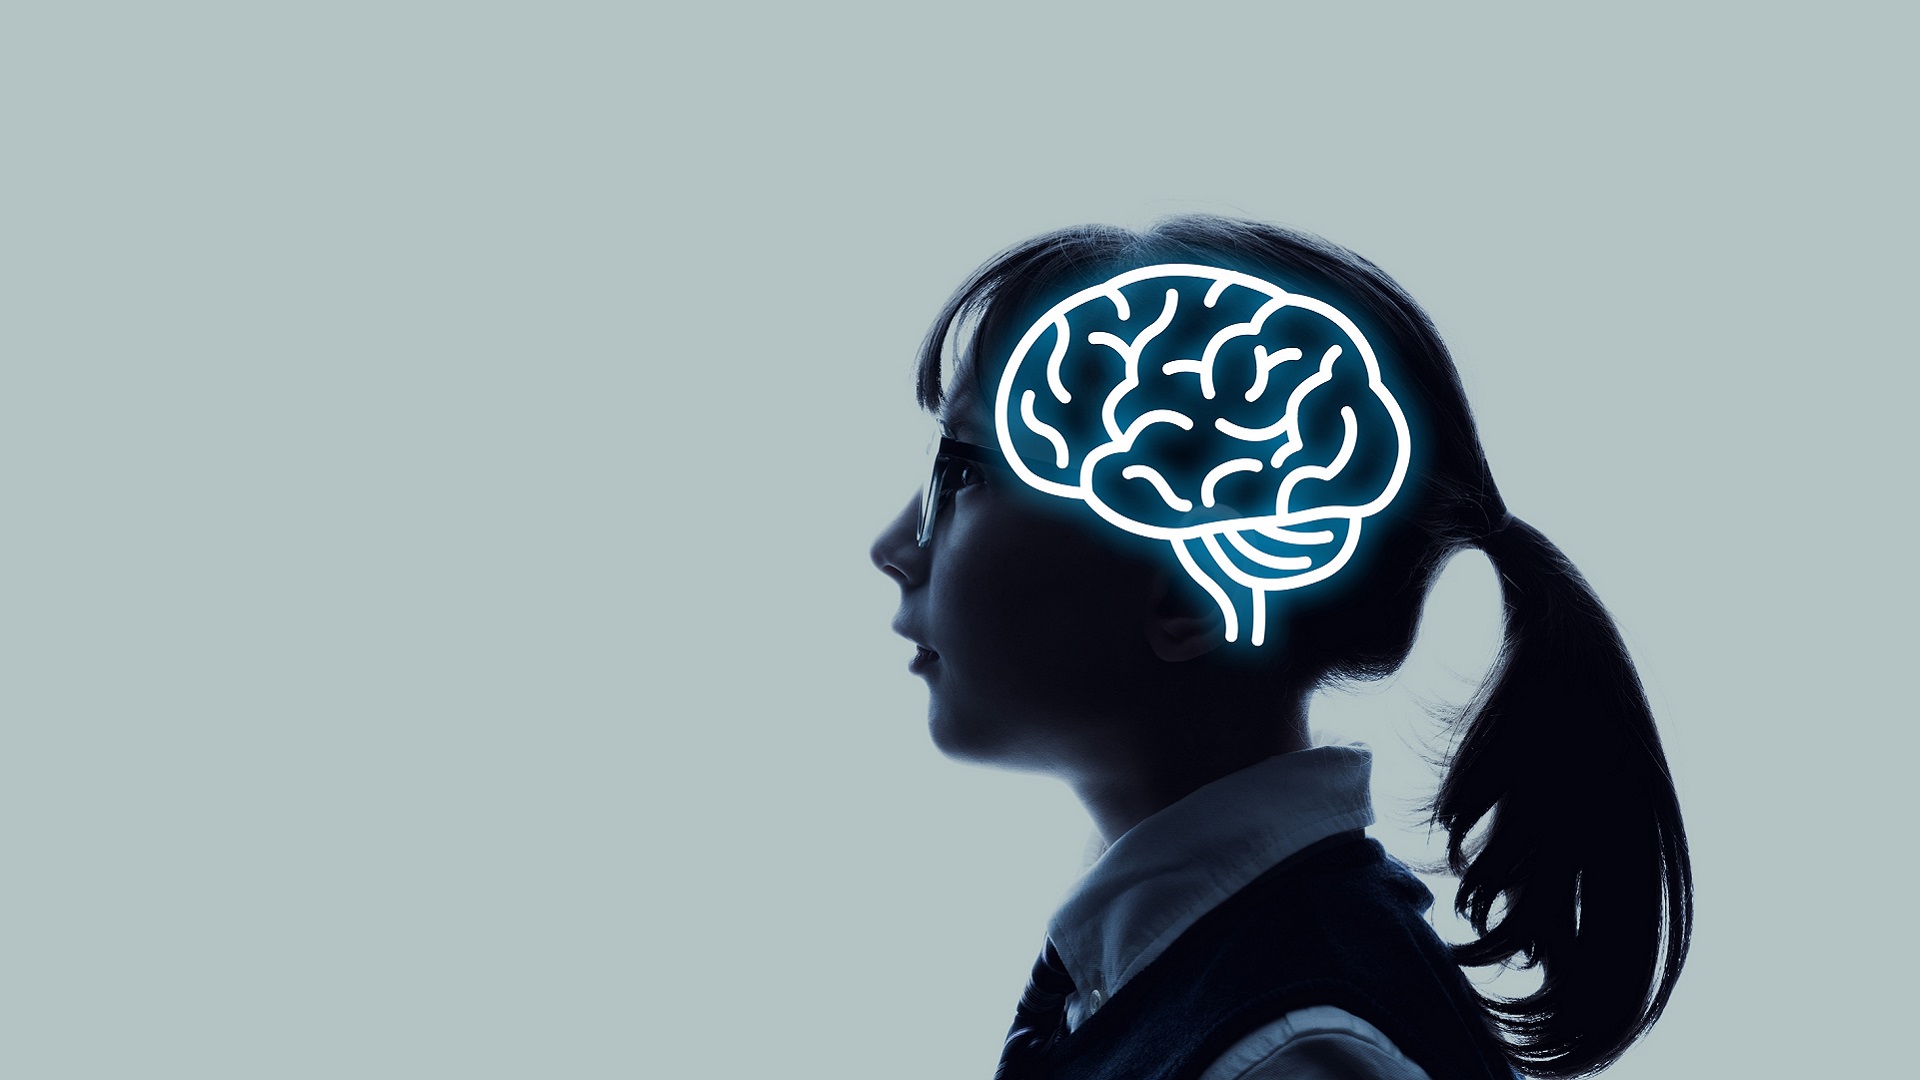 Scientists don't really get the female brain